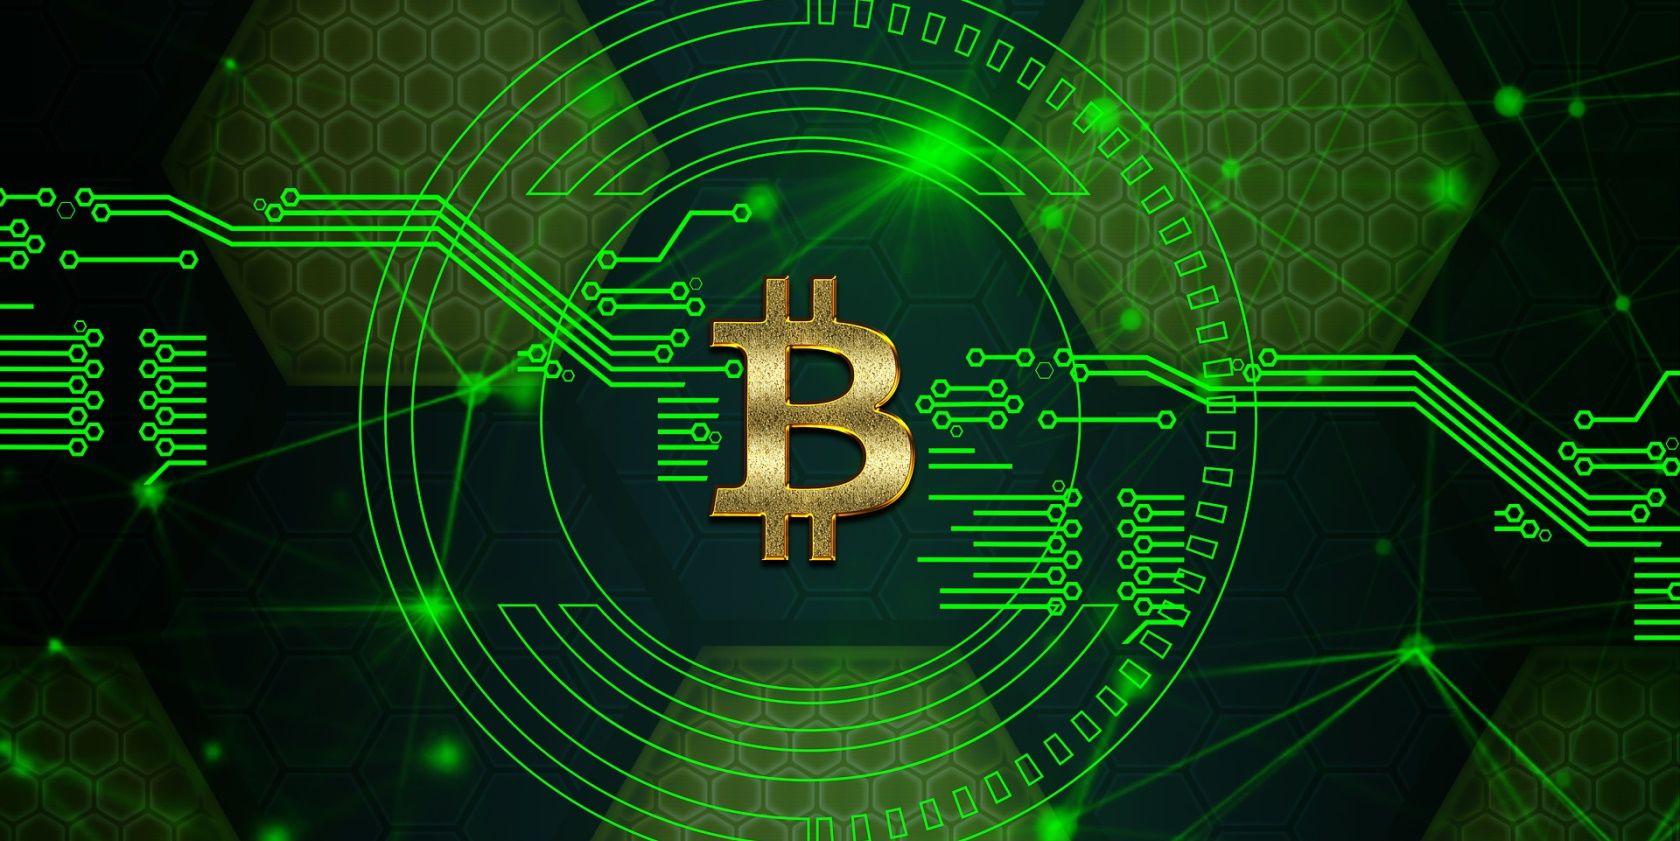 a picture showing bitcoin sign in a green light structure